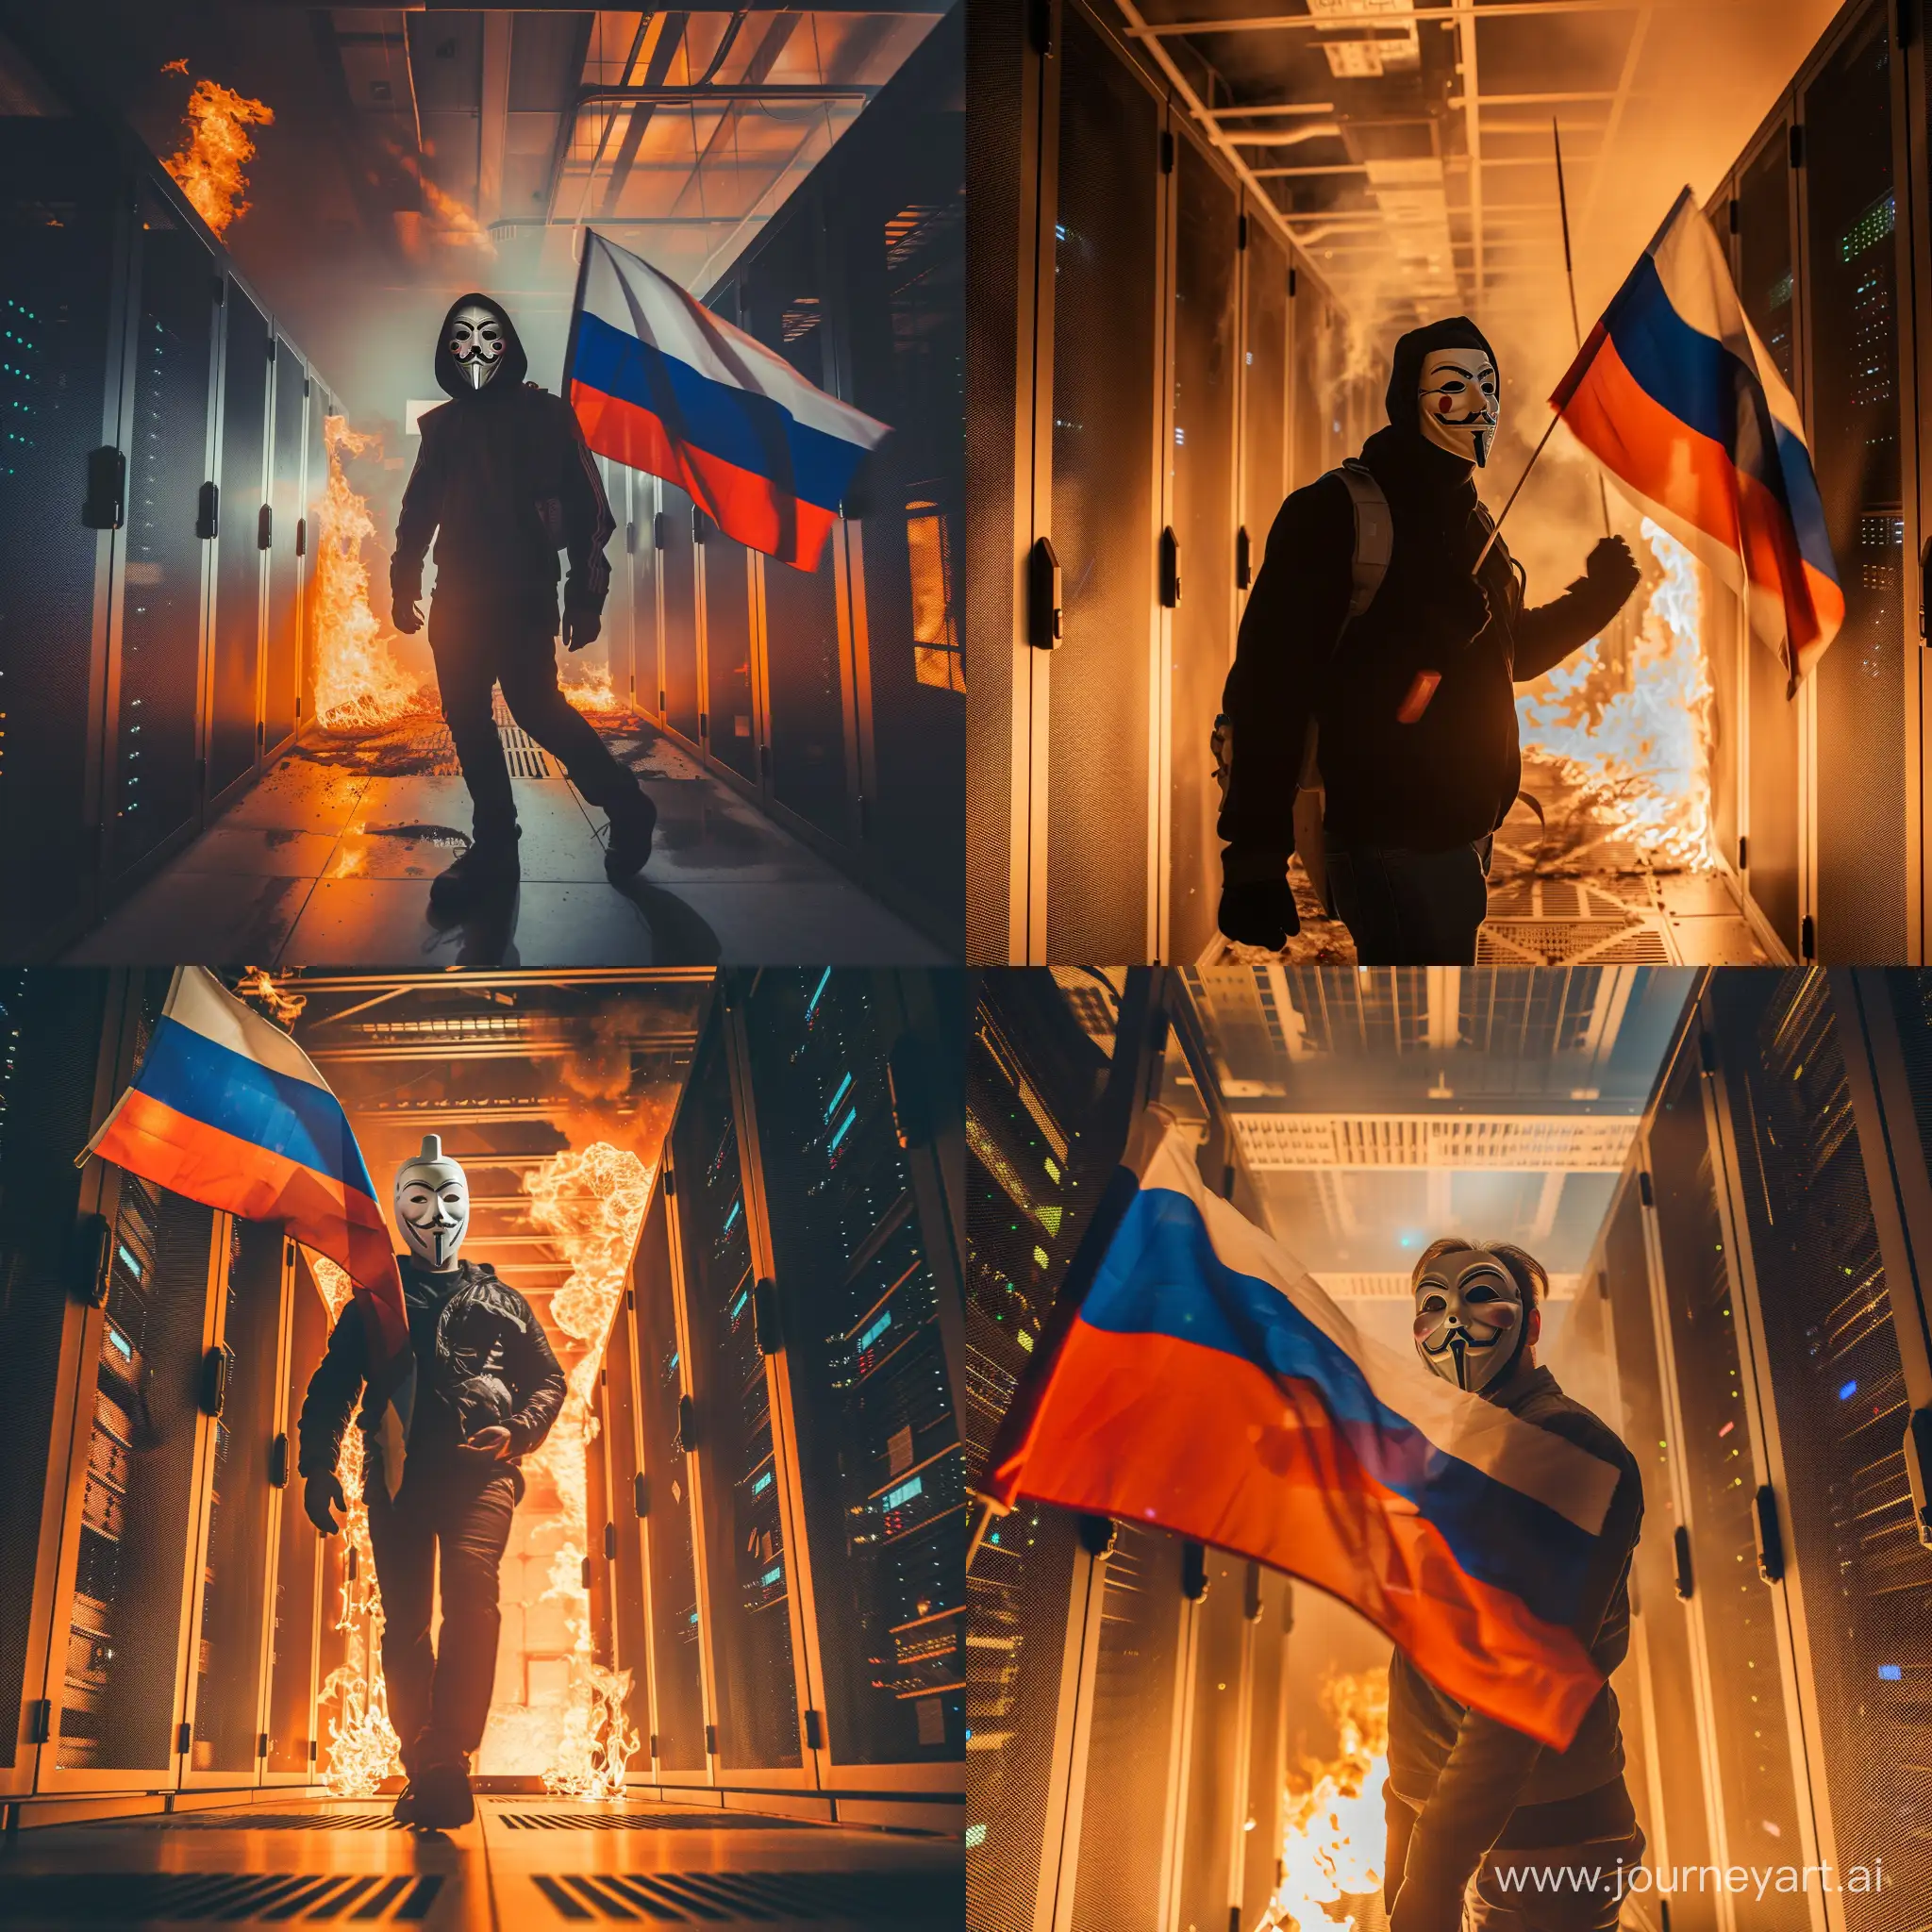 Anonymous-Hacker-with-Russian-Flag-in-Burning-Server-Room